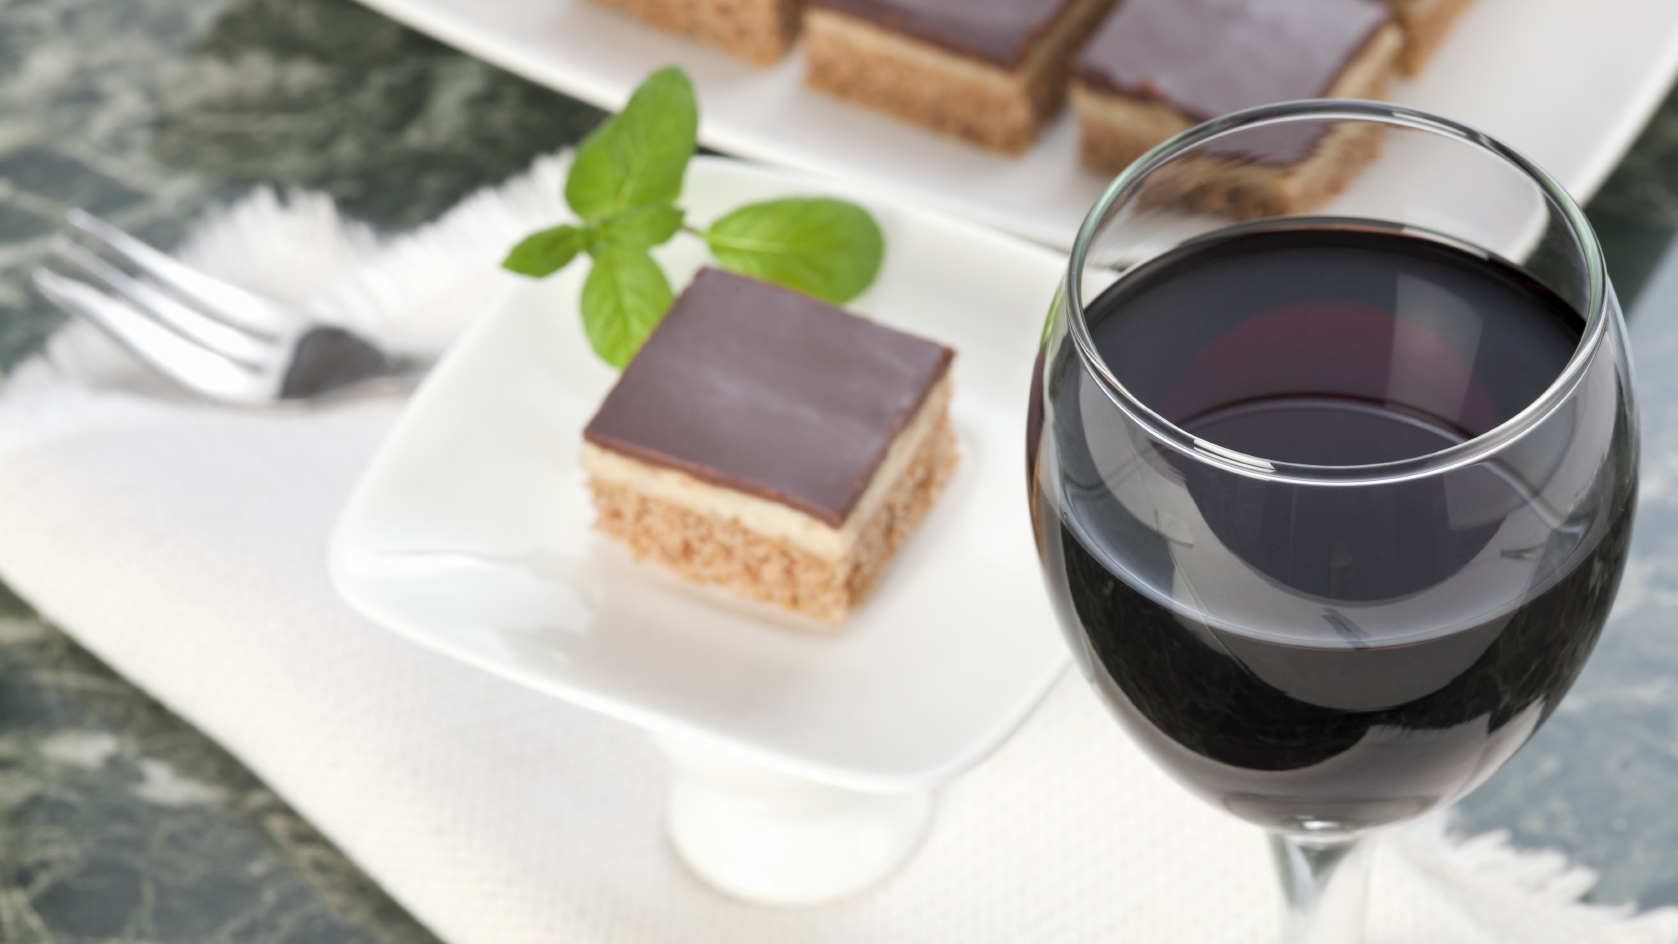 There are more than three-dozen polyphenols in red wine that could be beneficial. But resveratrol may not have much influence on our health. Photo: iStockphoto